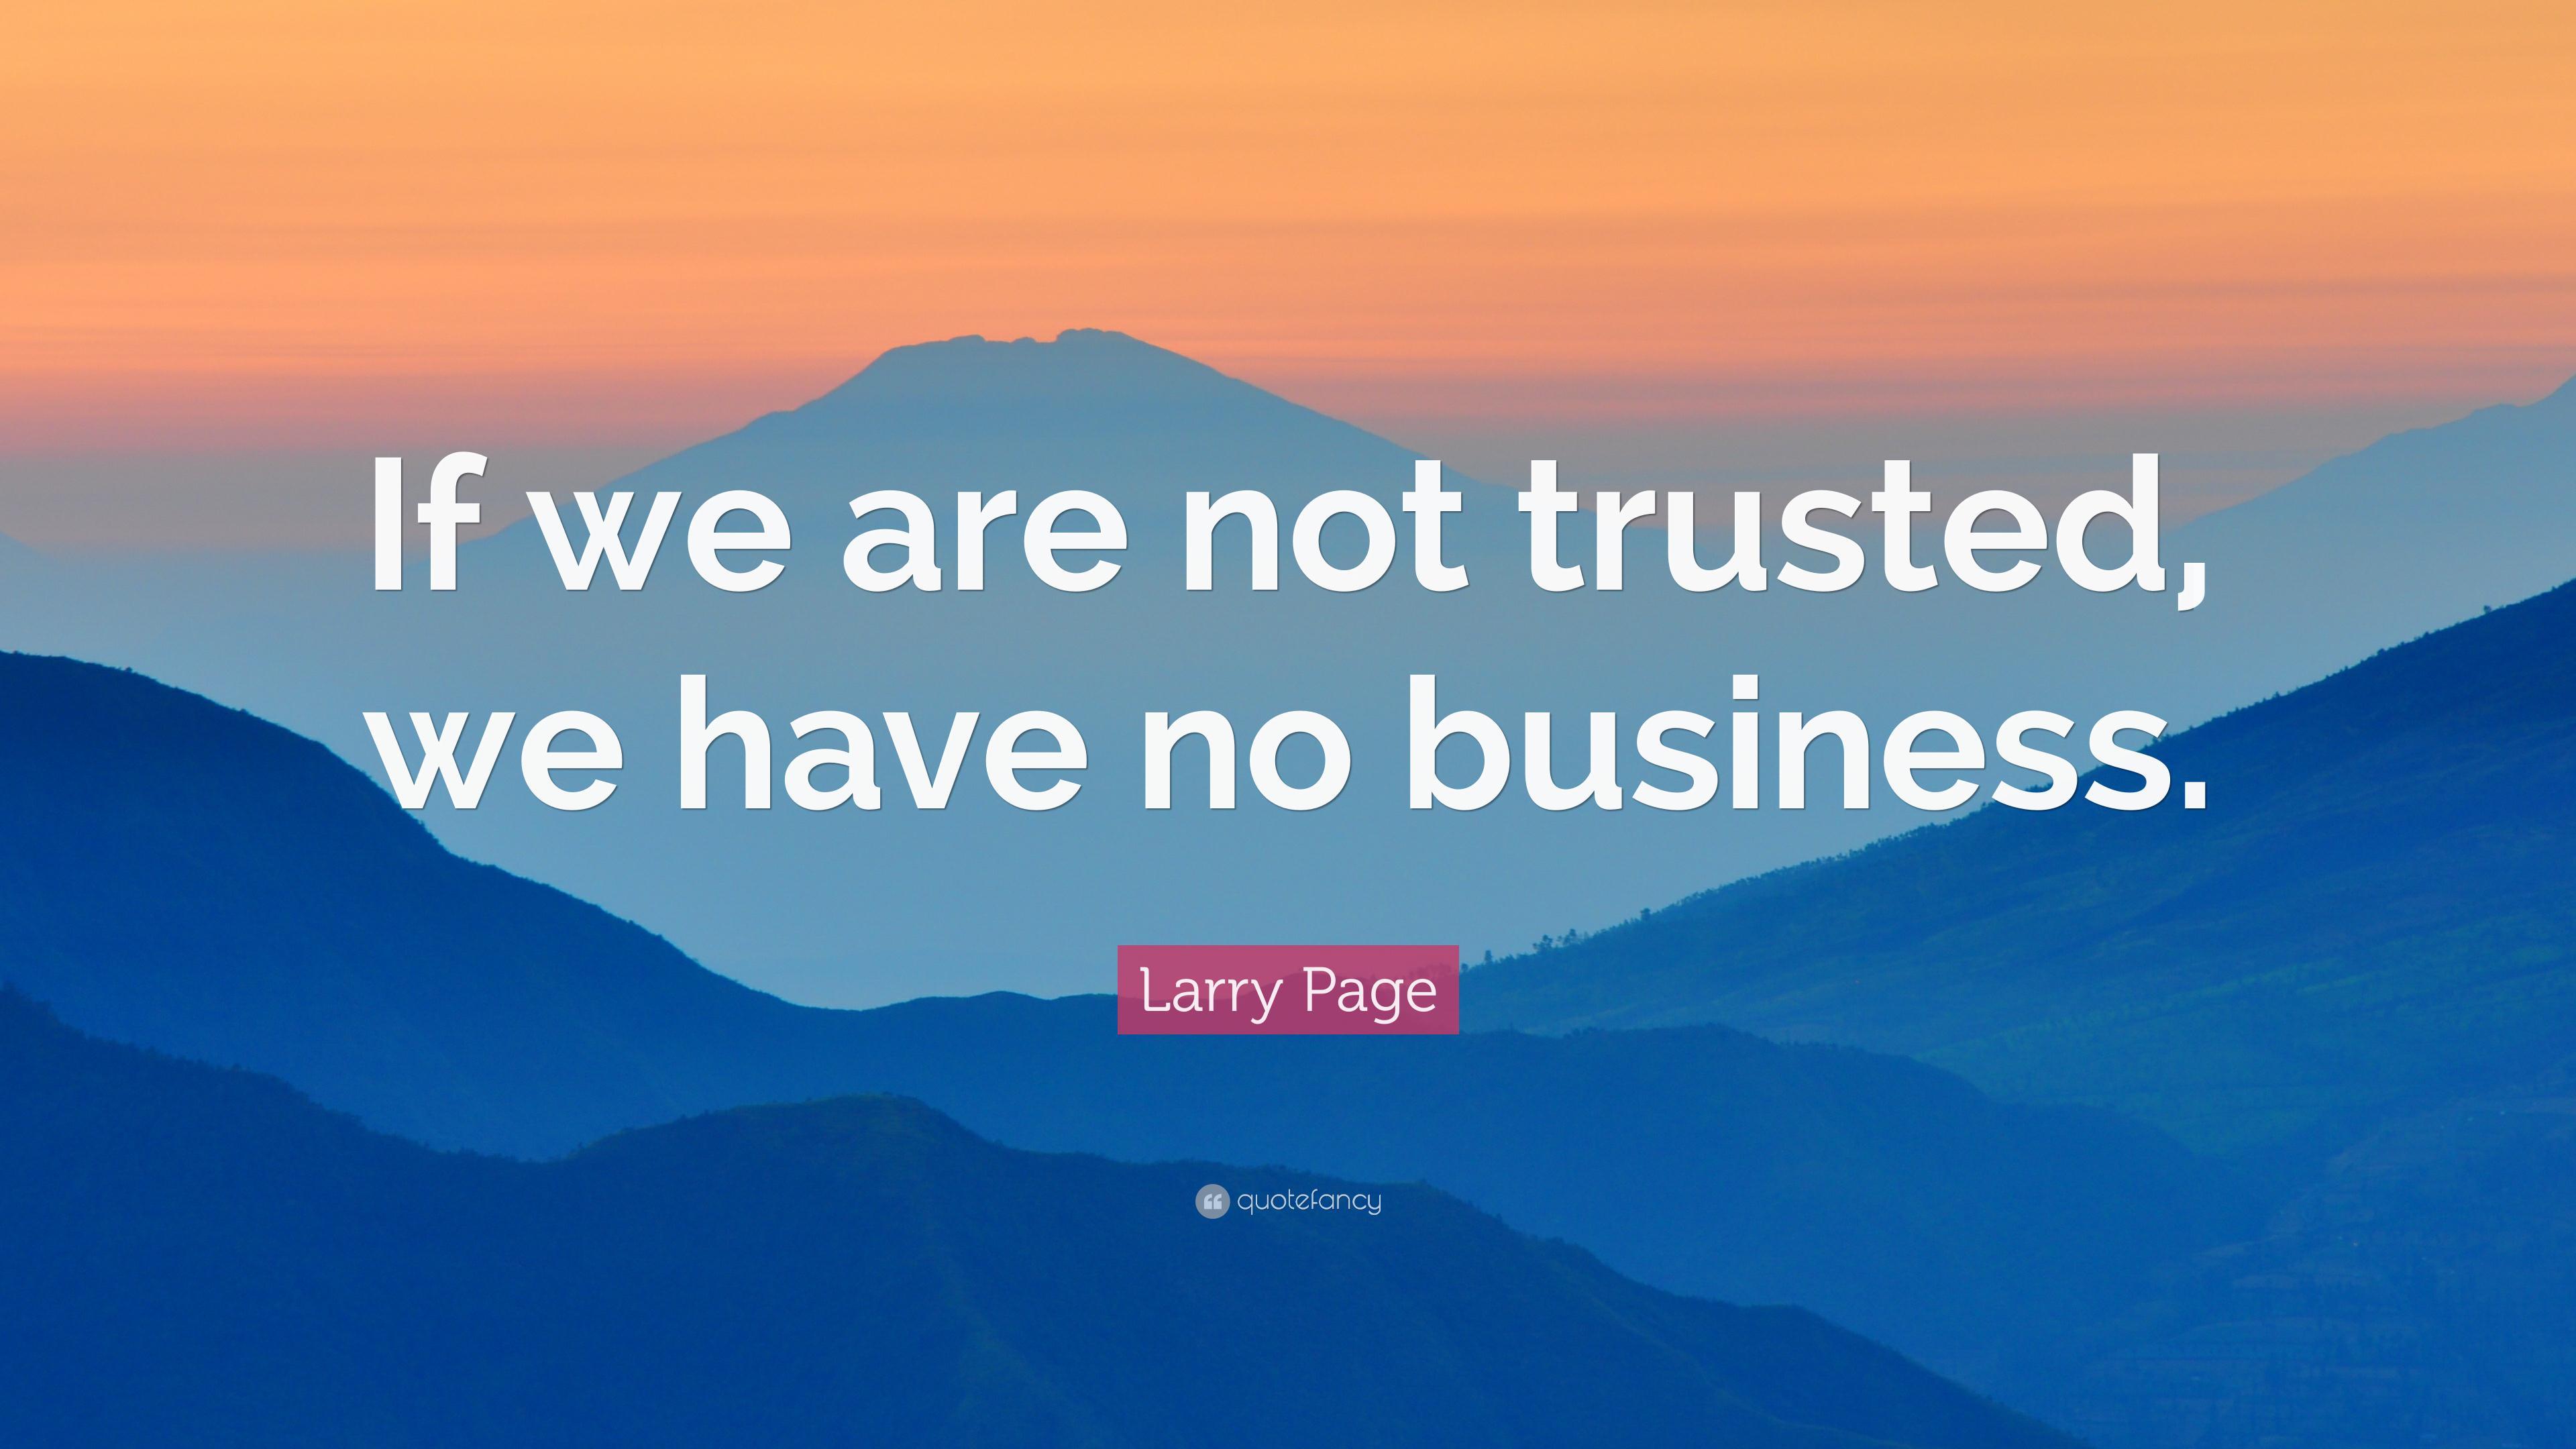 Larry Page Quote: “If we are not trusted, we have no business.” 10